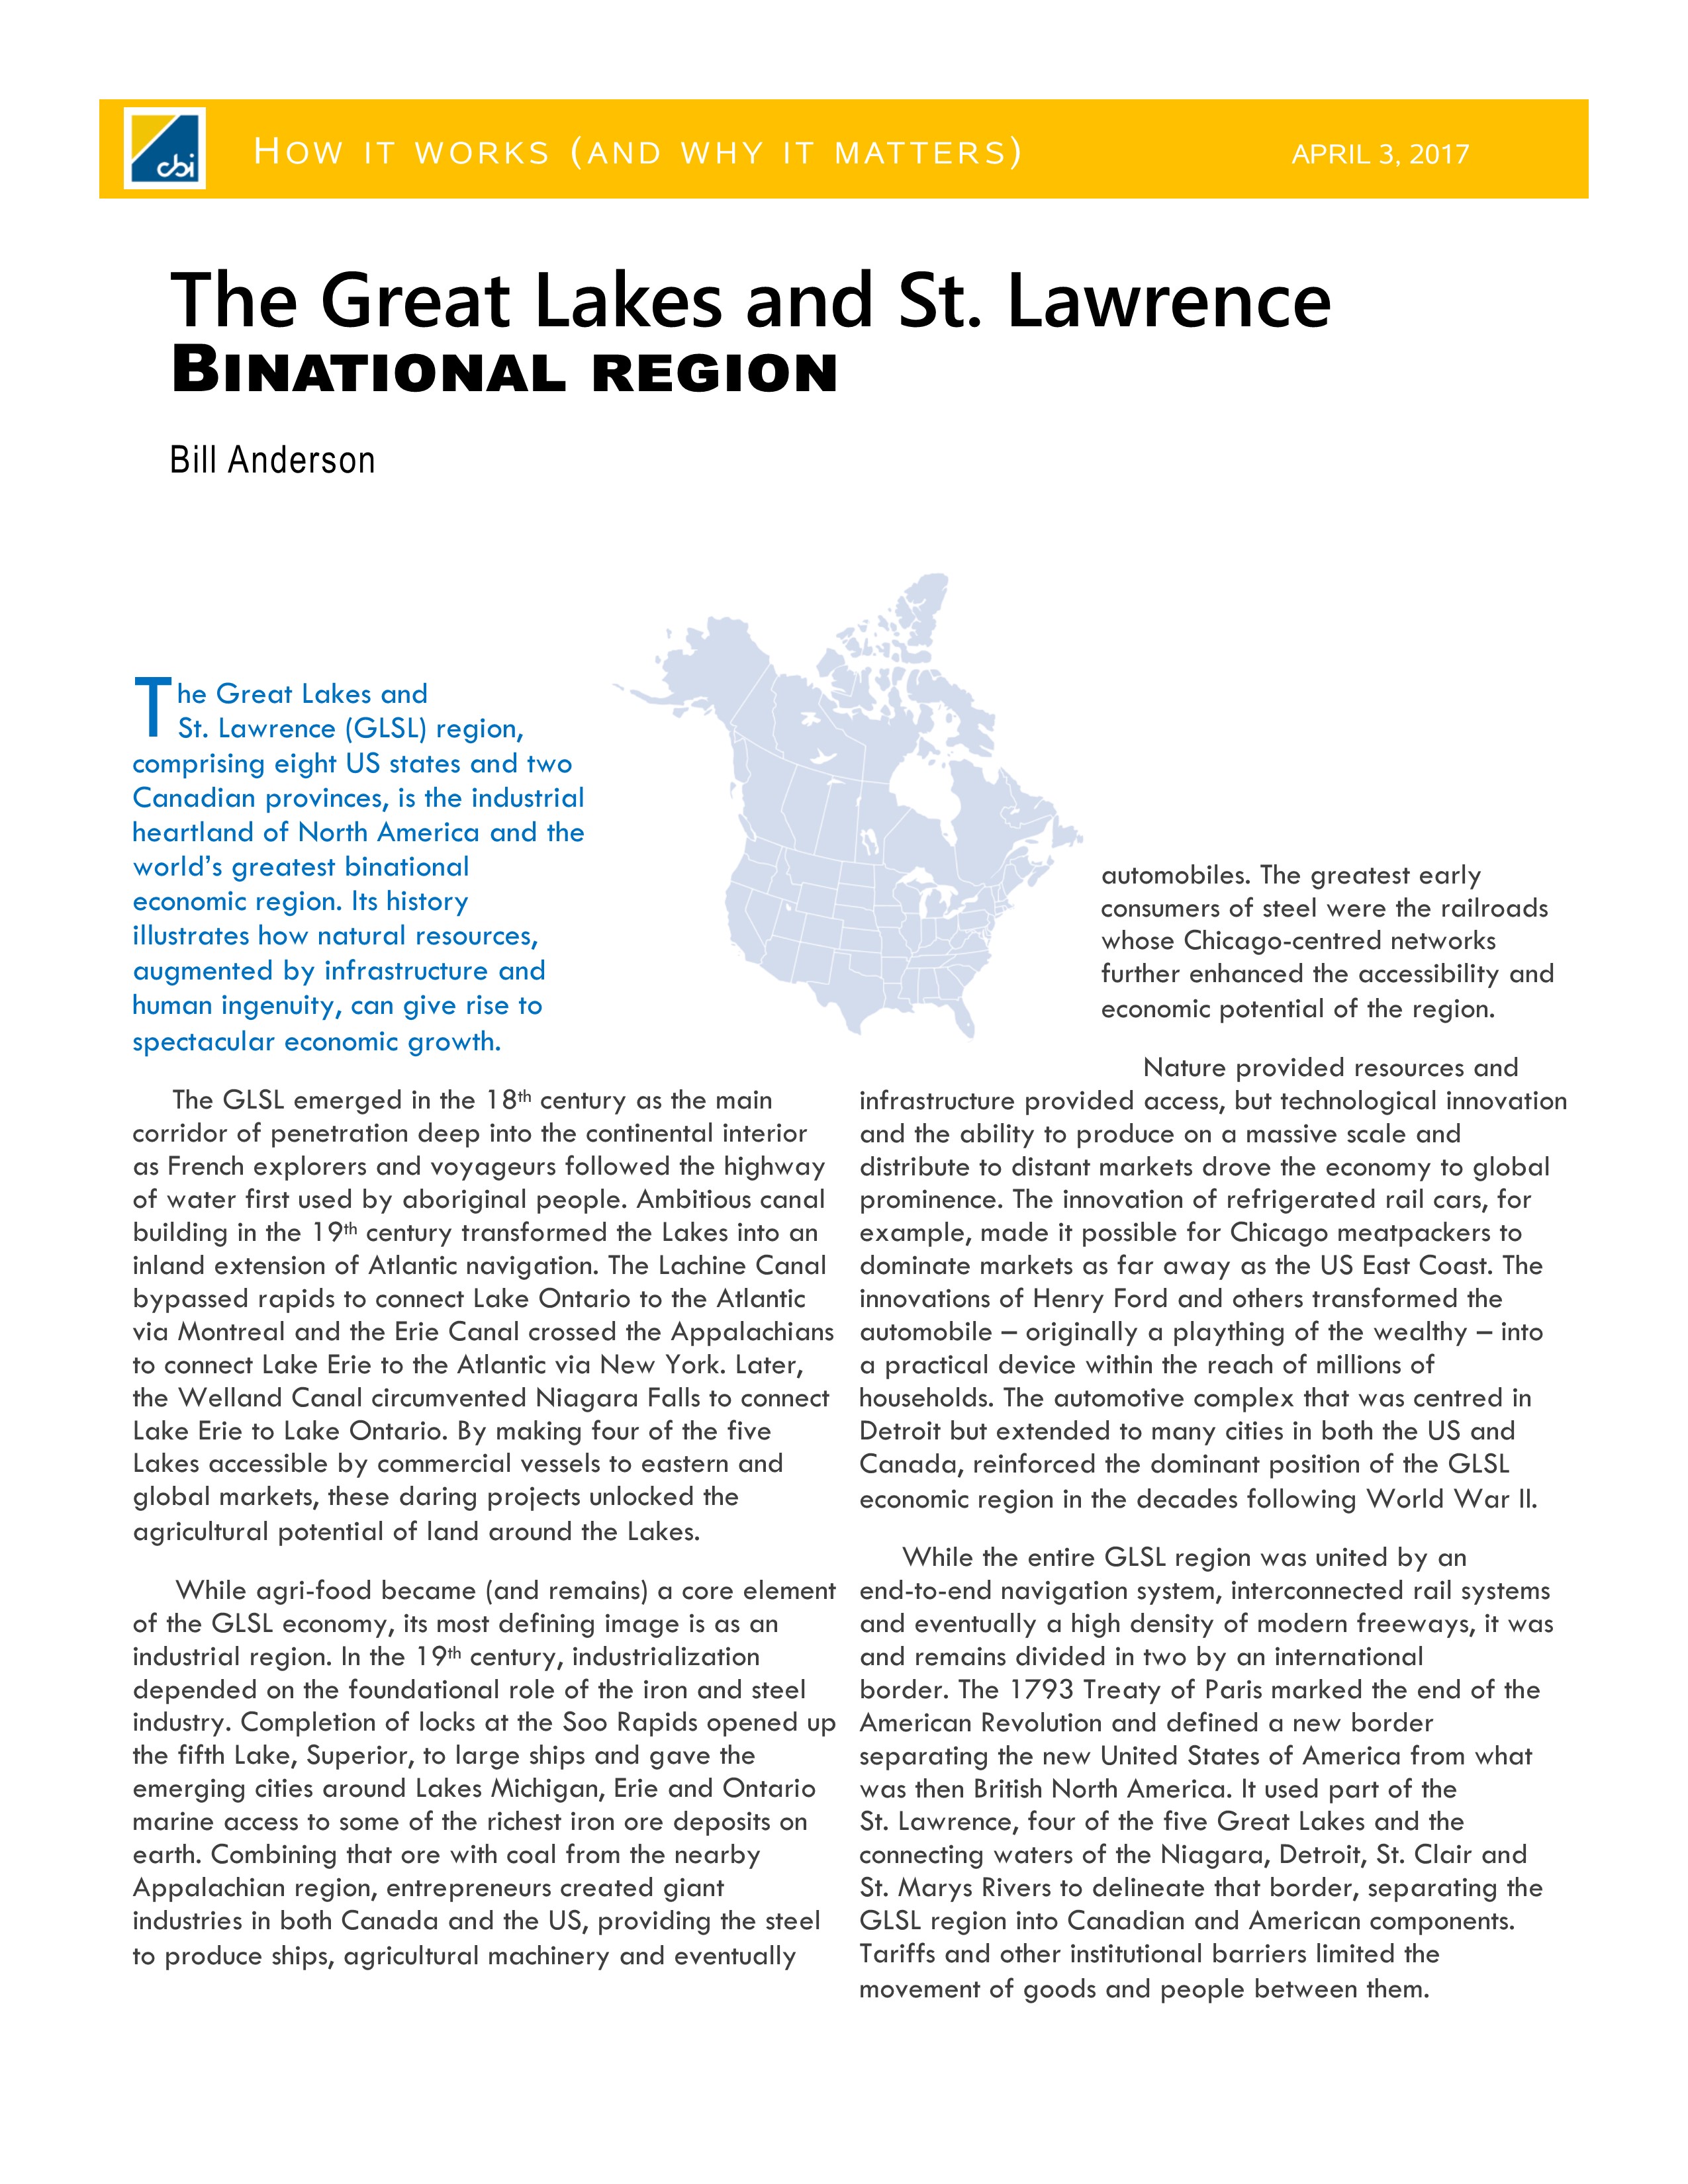 April 2017 – The Great Lakes and St. Lawrence Binational Region